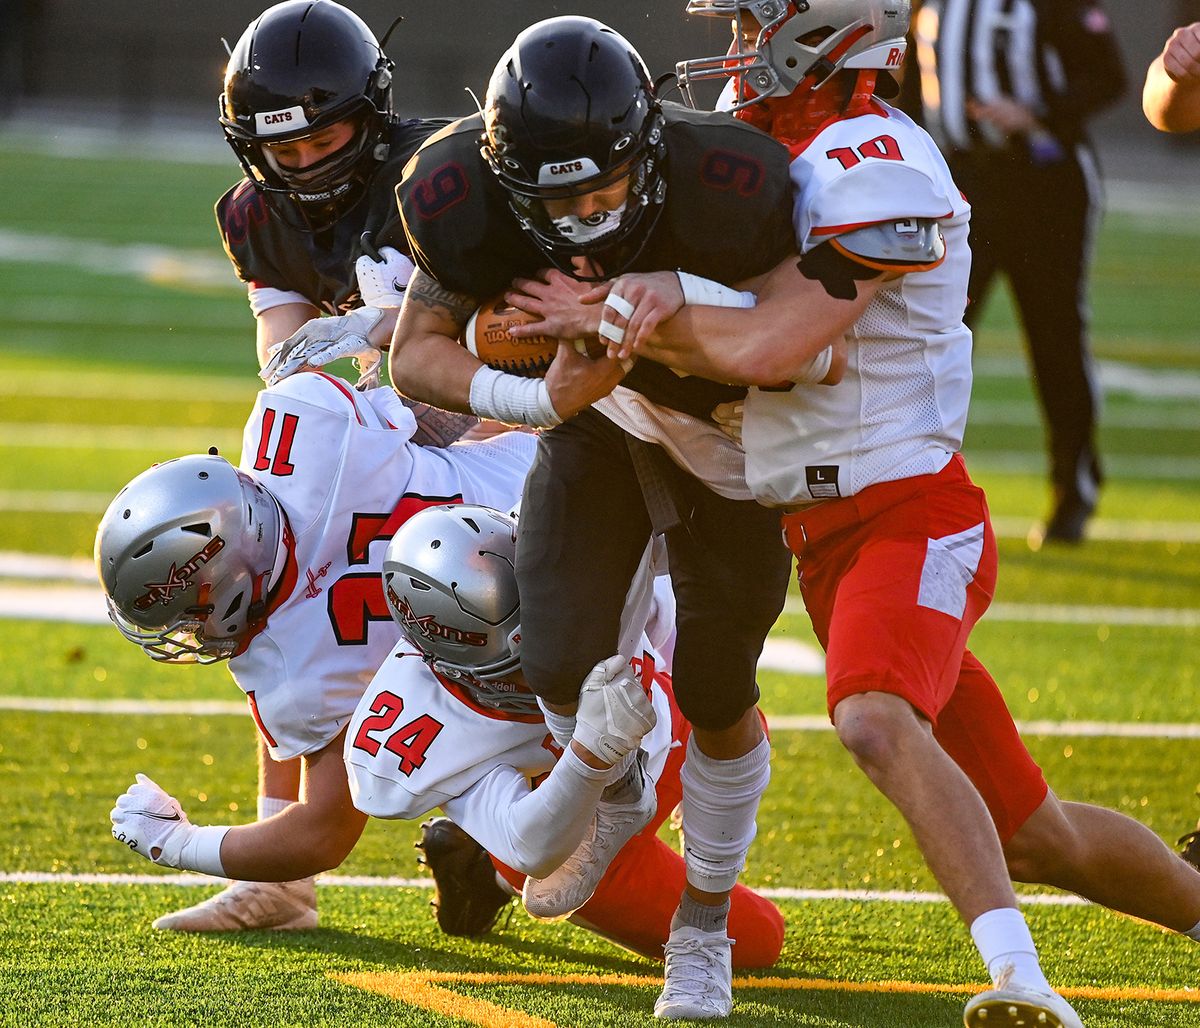 Mt. SpokaneÕs Aiden Prado (9) runs the ball as Ferris defensive back Al Newcomb (10) moves in to tackle during the first half of a GSL high school football game, Fri., March 12, 2021, at Union Stadium in Mead, Wash. (Colin Mulvany/THE SPOKESMAN-REVIEW)